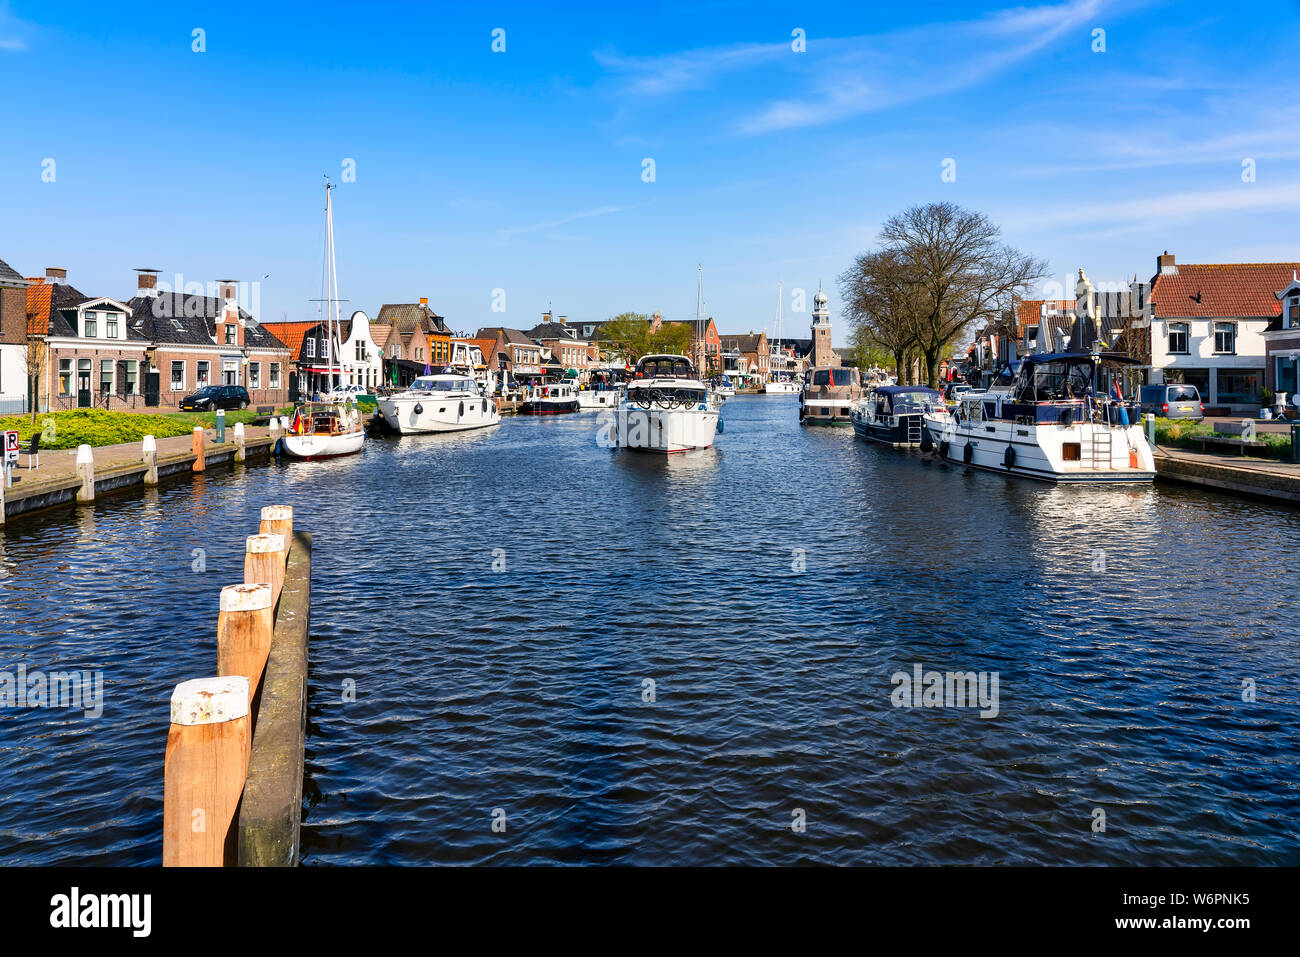 Lemmer is a town in the municipality of De Fryske Marren (province of Friesland), in the Netherlands and is one of Friesland's most important water sp Stock Photo